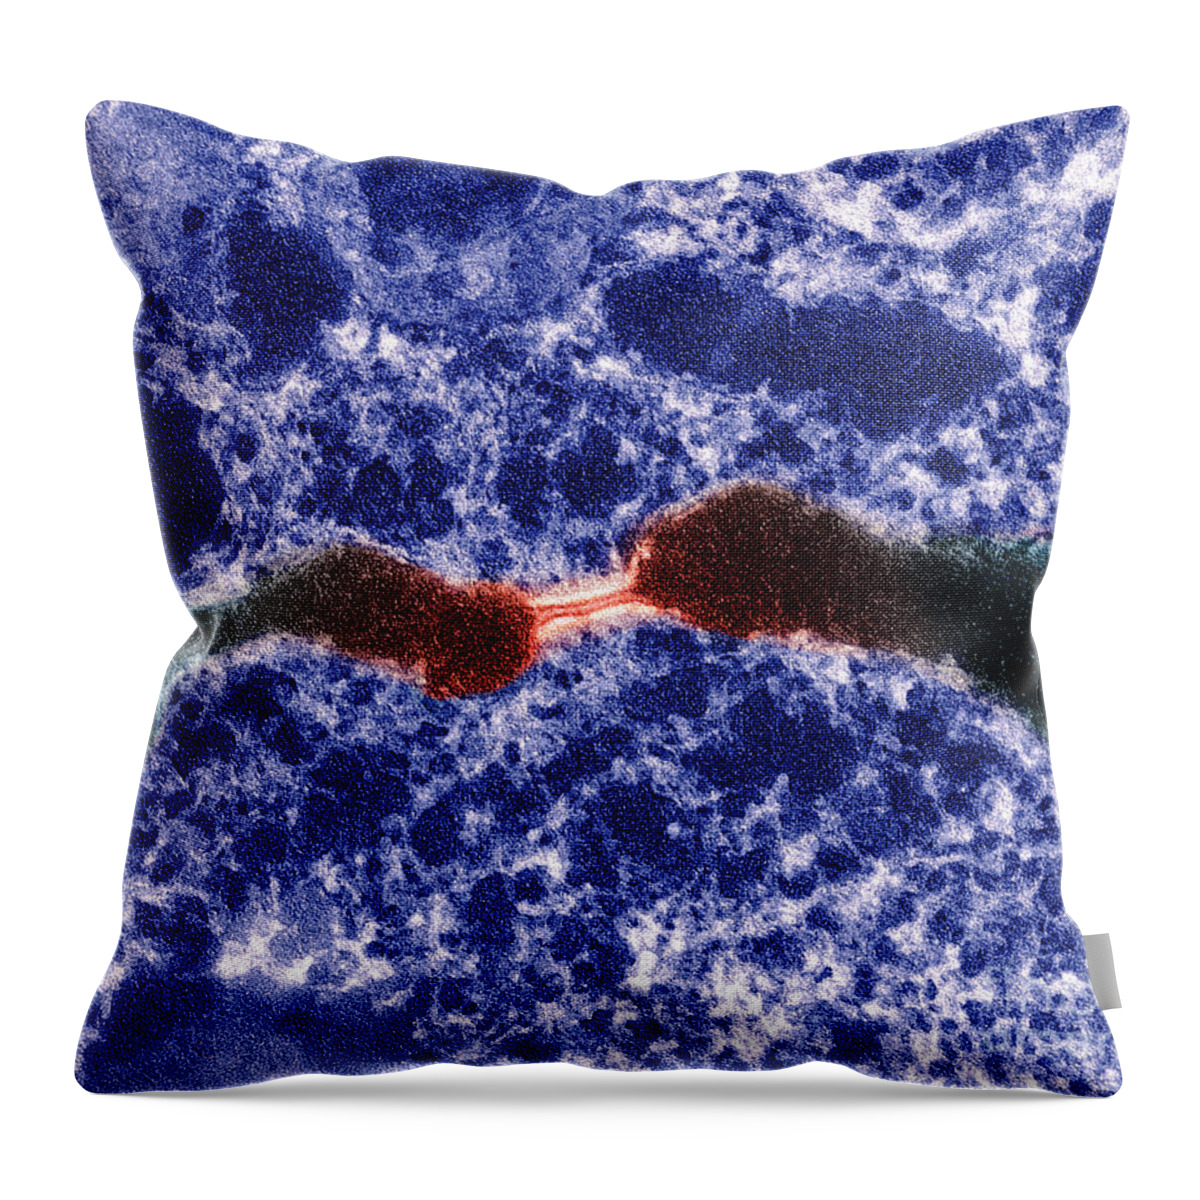 Desmosome Throw Pillow featuring the photograph Desmosome #1 by Stem Jems